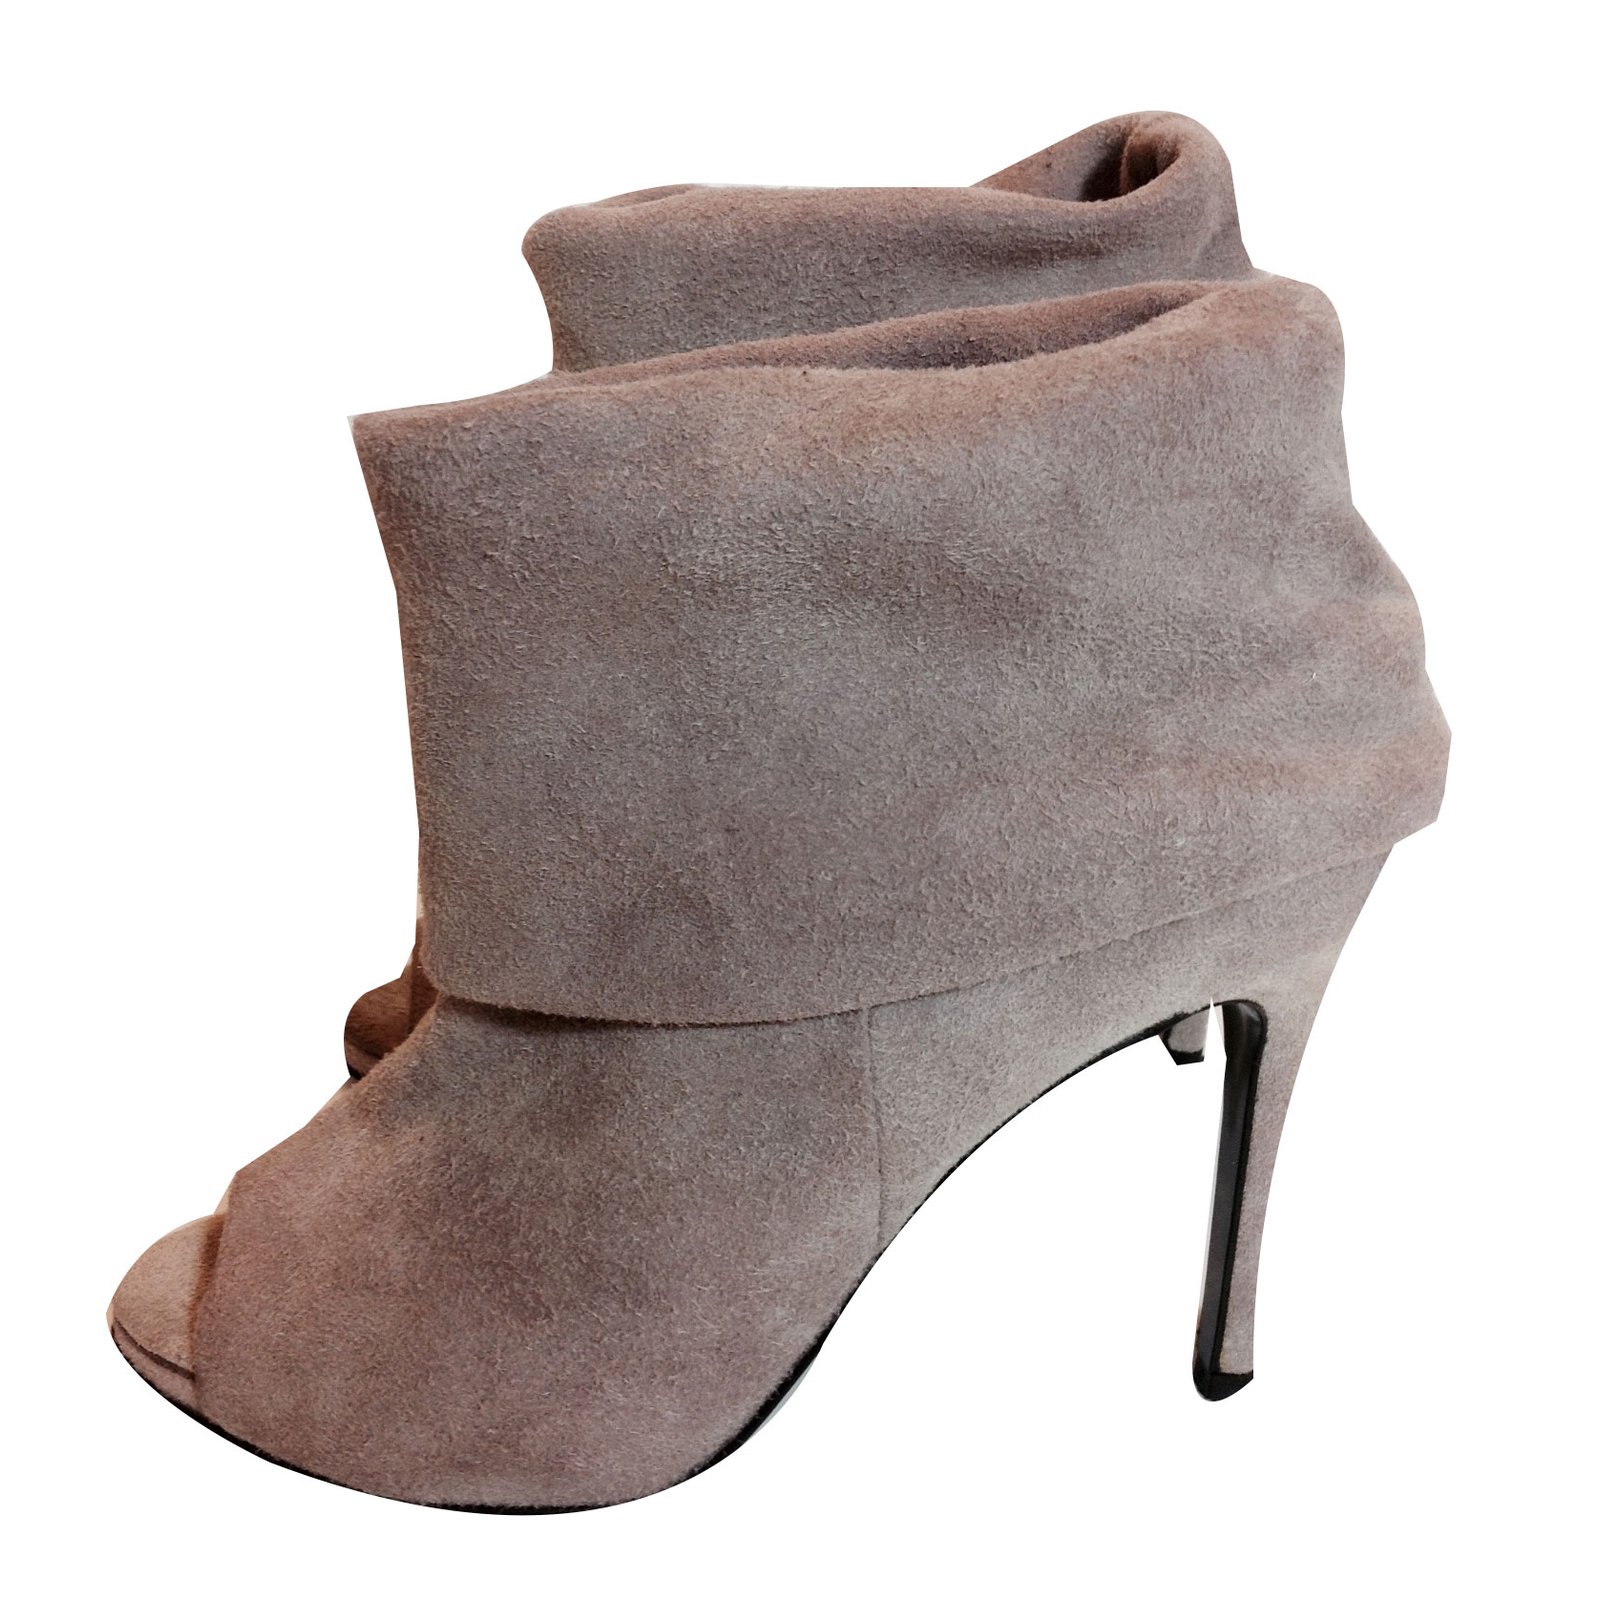 Acne Dusty pink ankle boots Ankle Boots 